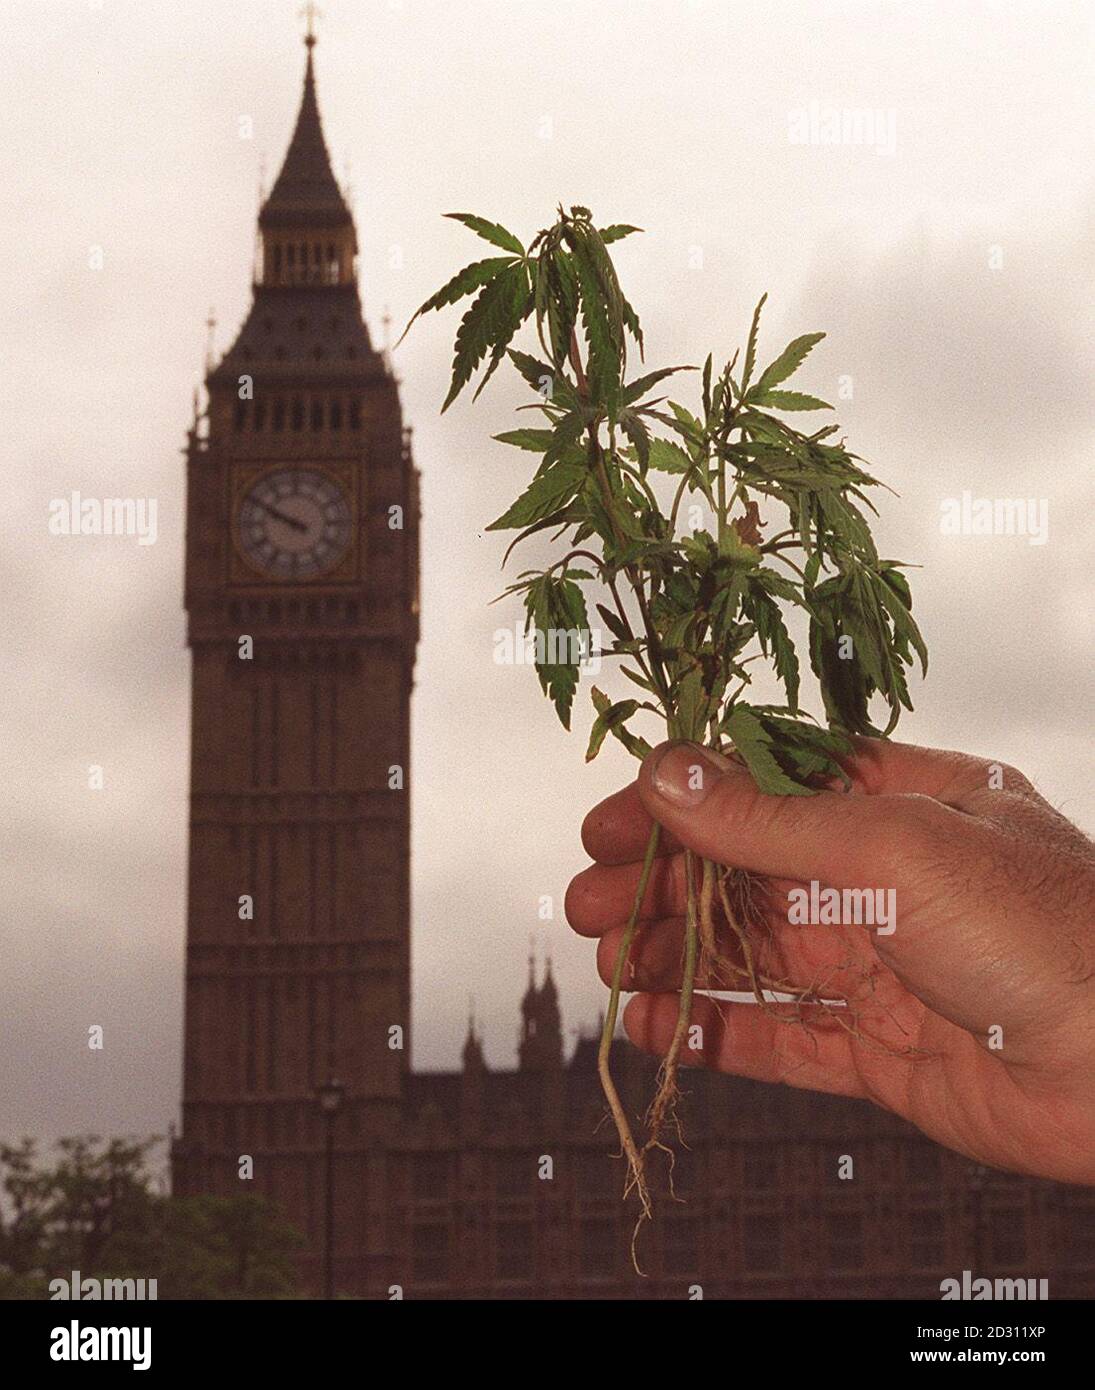 What is believed to be a marijuana plant found growing in Parliament Square, central London. Police were examining the plants which are believed to be the result of a May Day guerilla gardening campaign by the group Reclaim the Streets.   * During the protest a number of seeds were planted and it is thought cannabis could have been among them.  Stock Photo